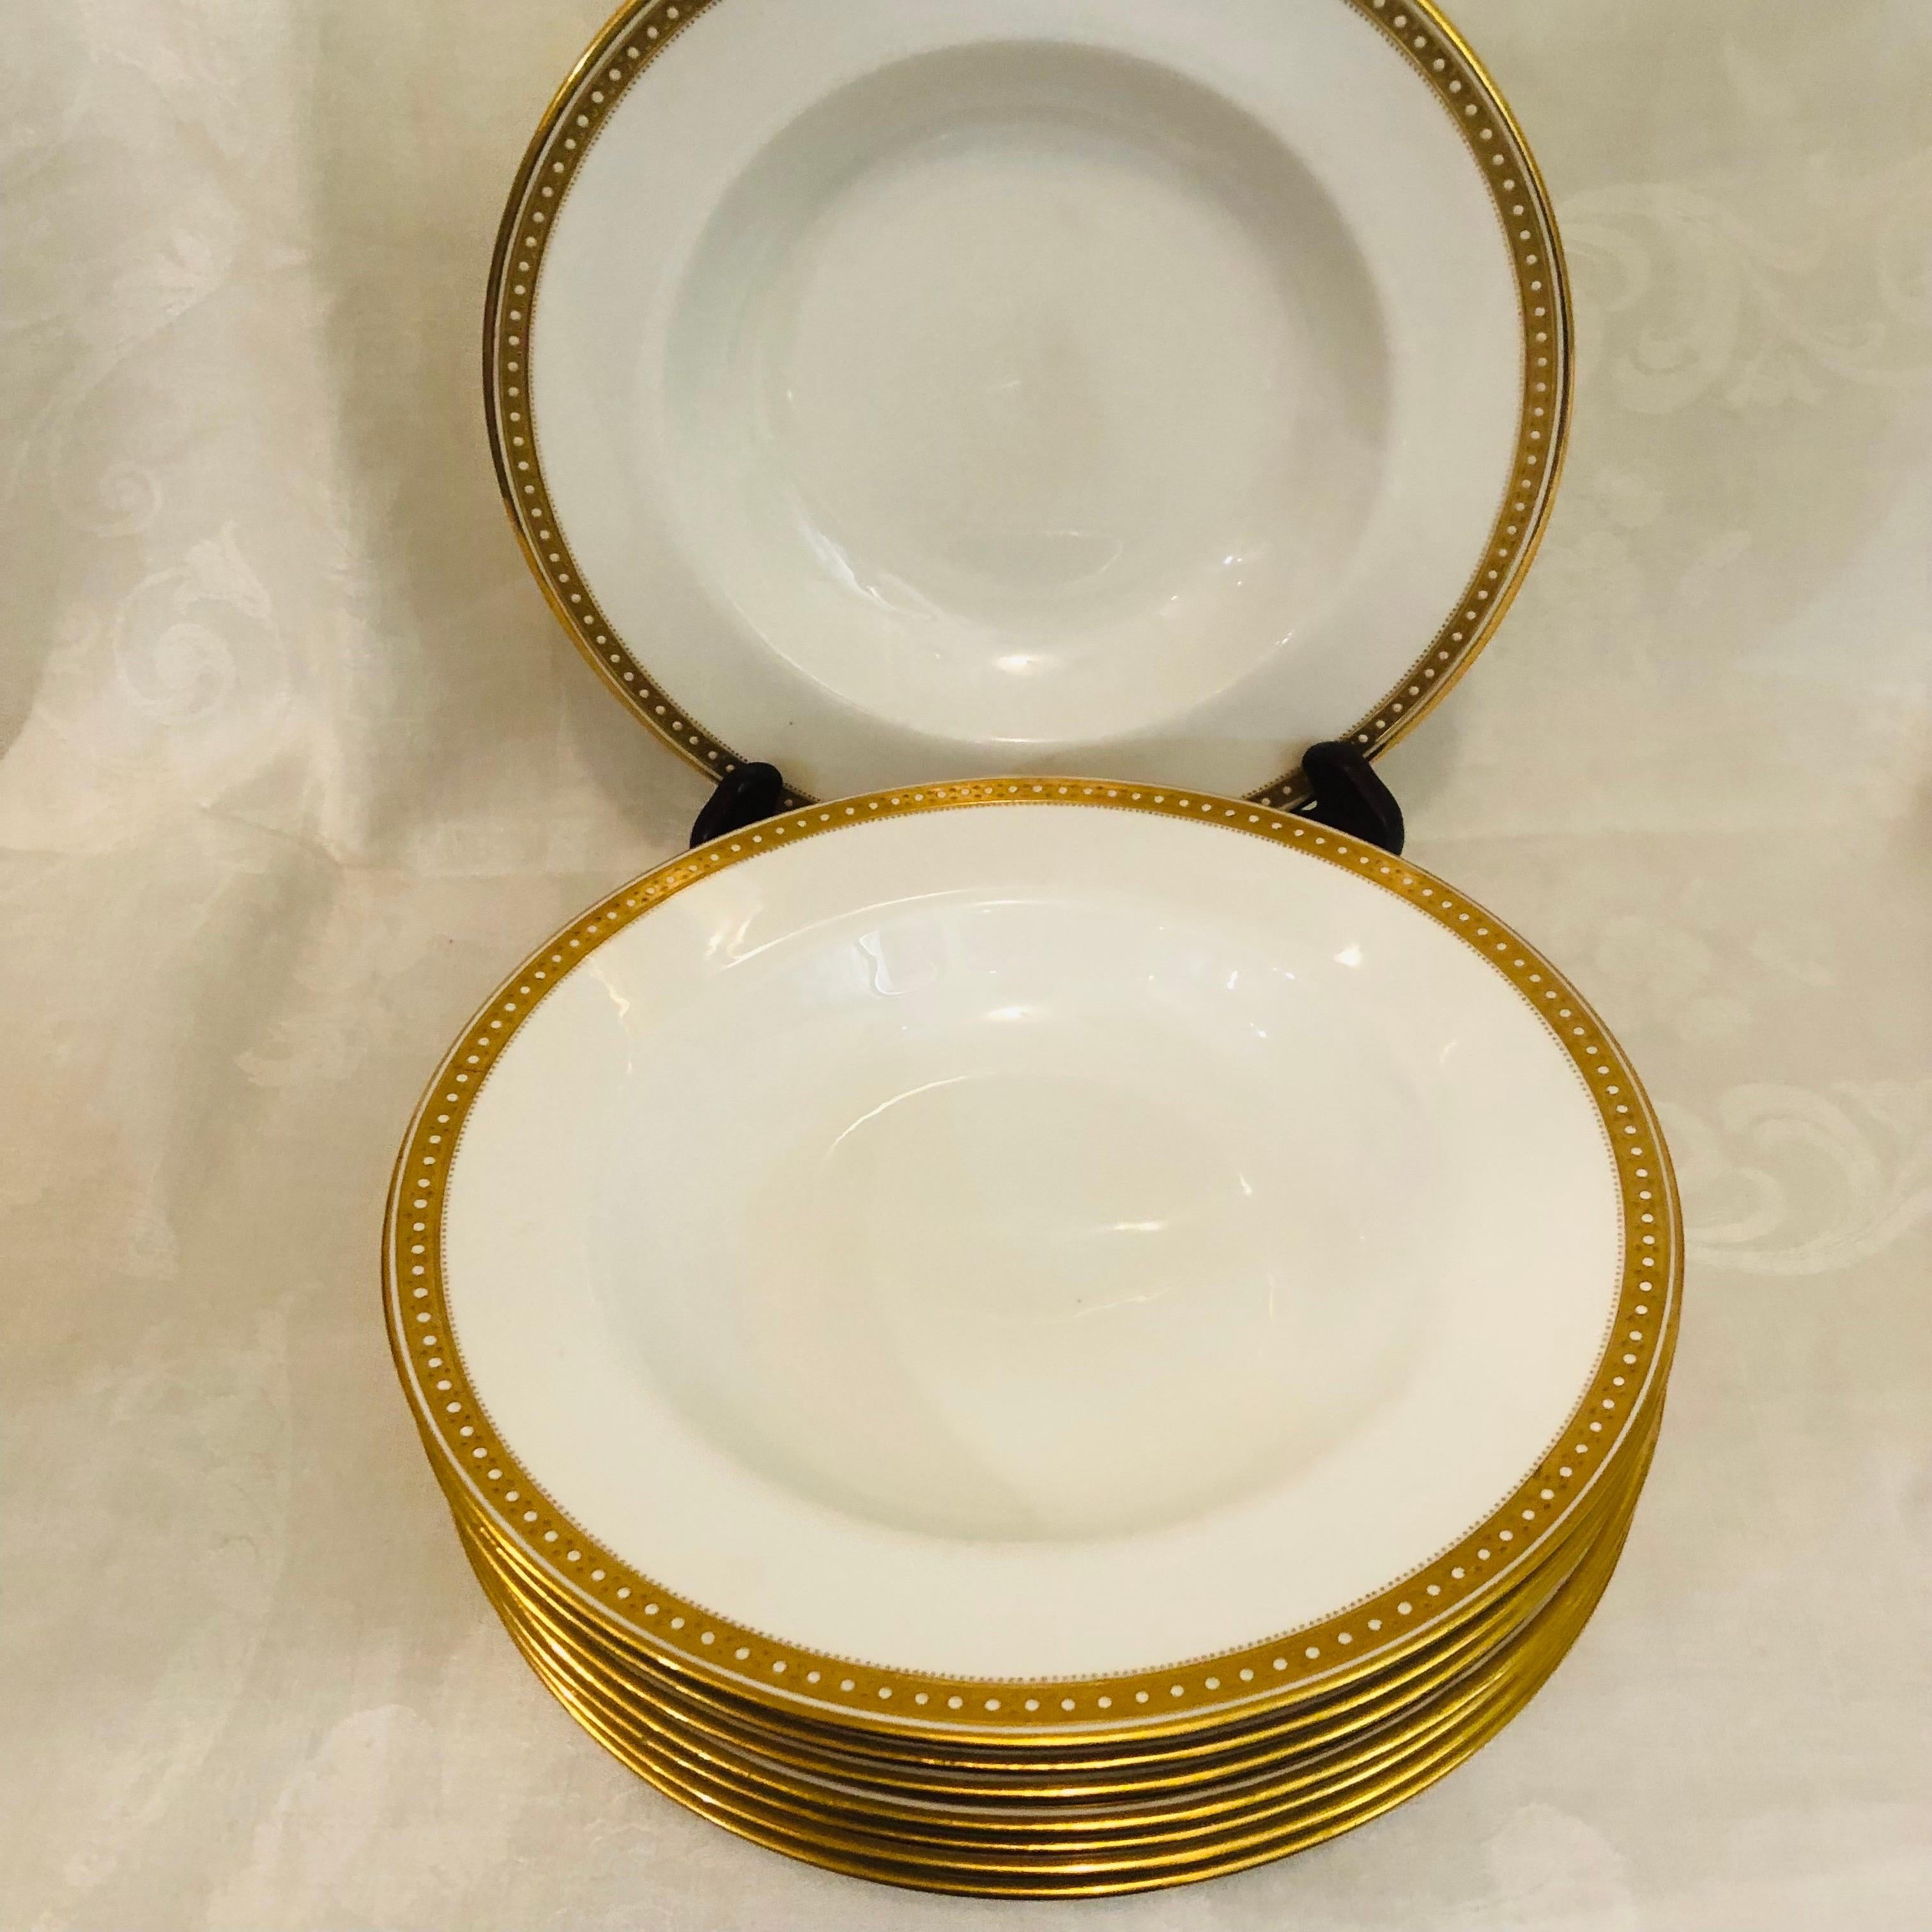 Gilt 16 Copeland Spode Wide Rim Soups Made for T. Goode with Gold Border & Jeweling